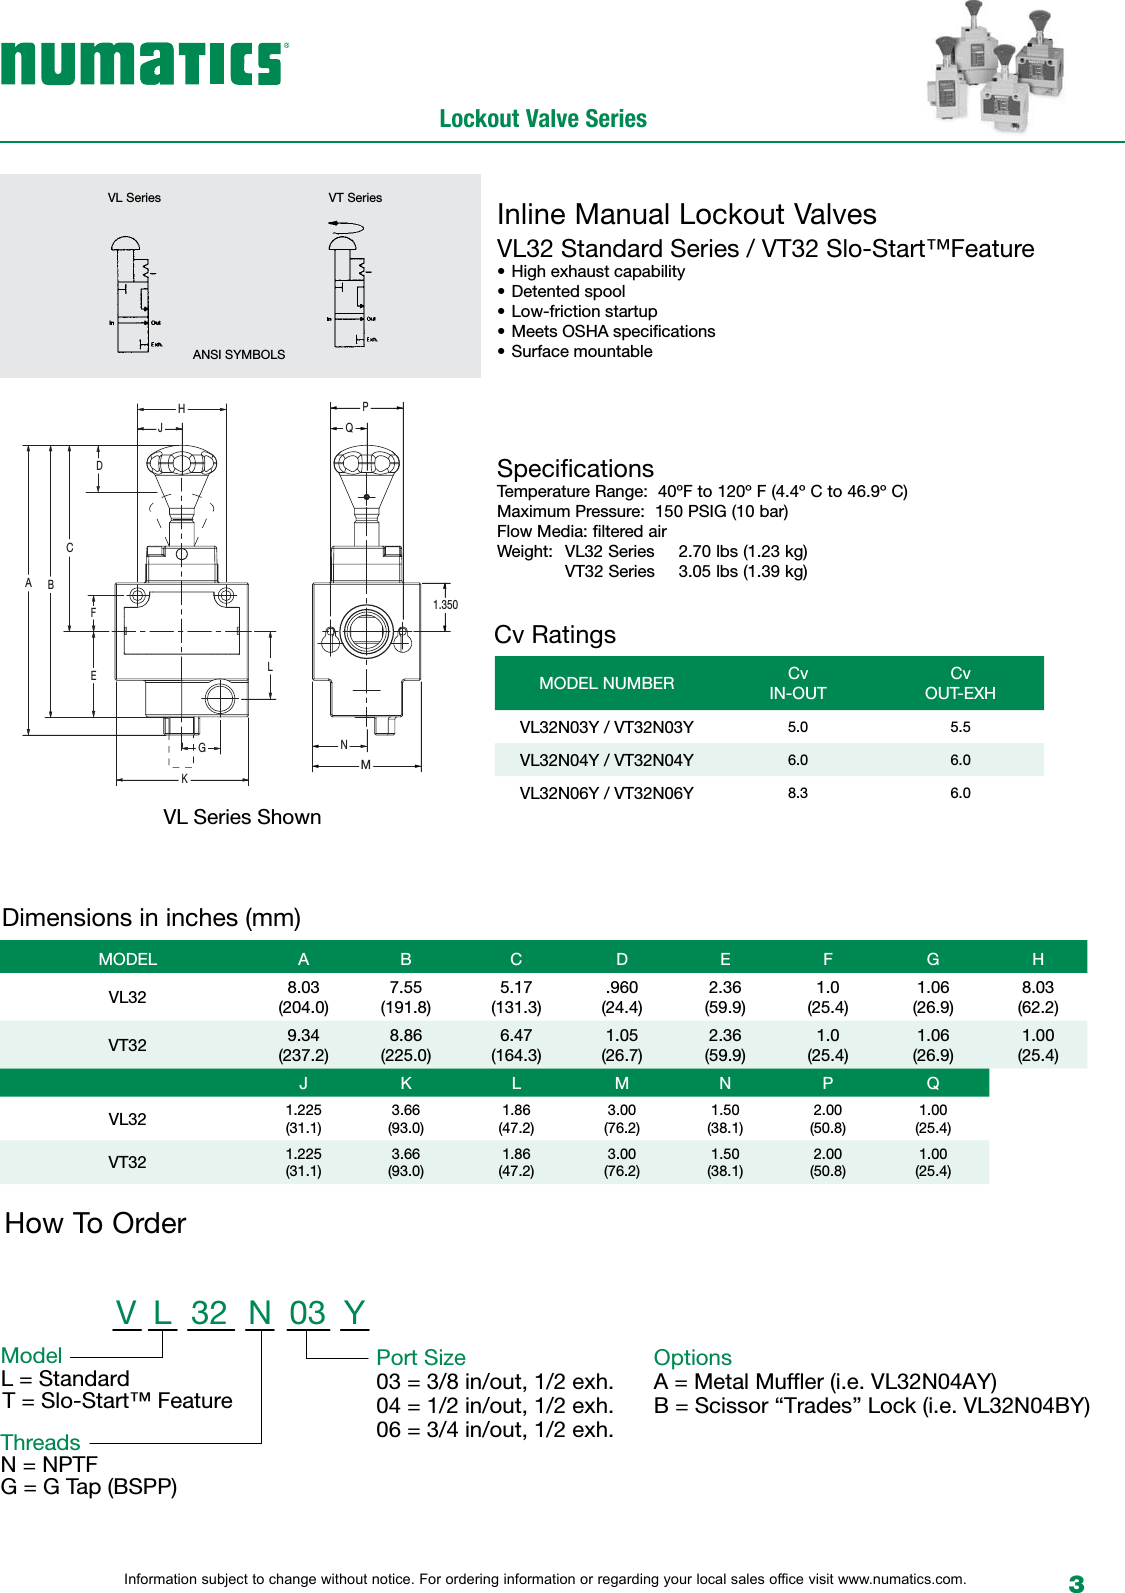 Page 5 of 12 - Flow Numatic Lockout Series-1505484633 User Manual